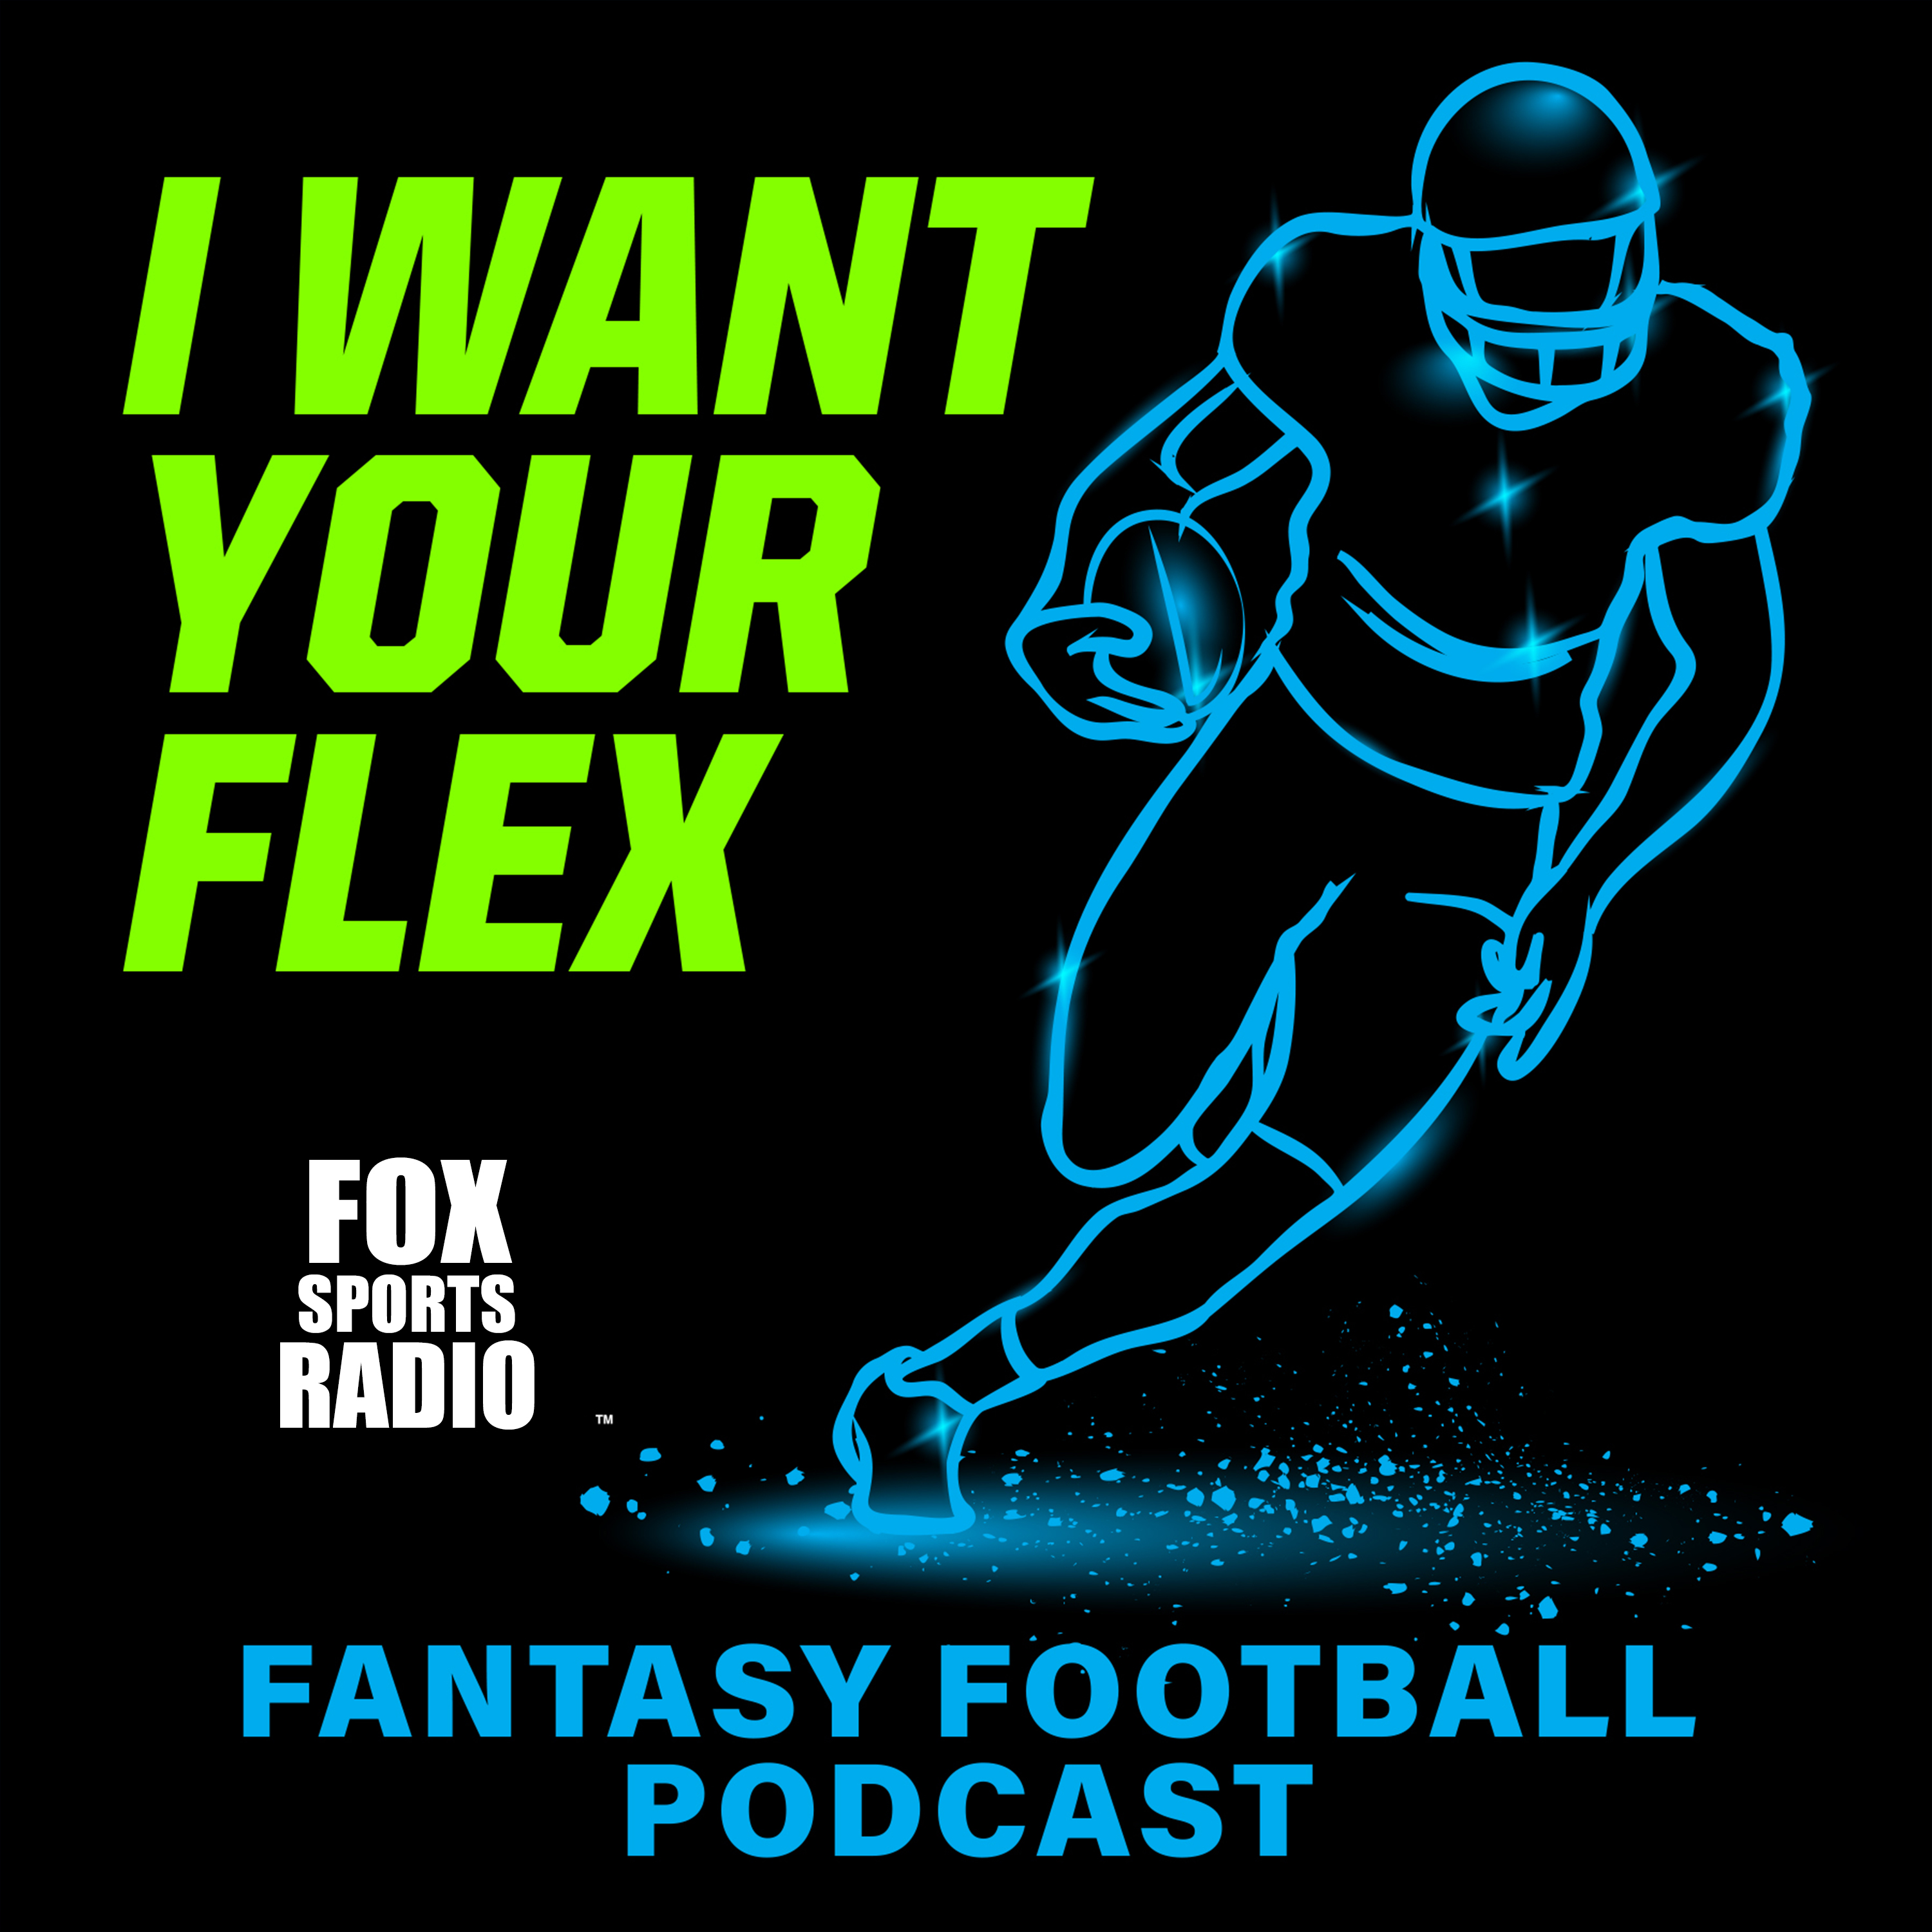 I WANT YOUR FLEX - Week 17 Rankings and Hot Plays